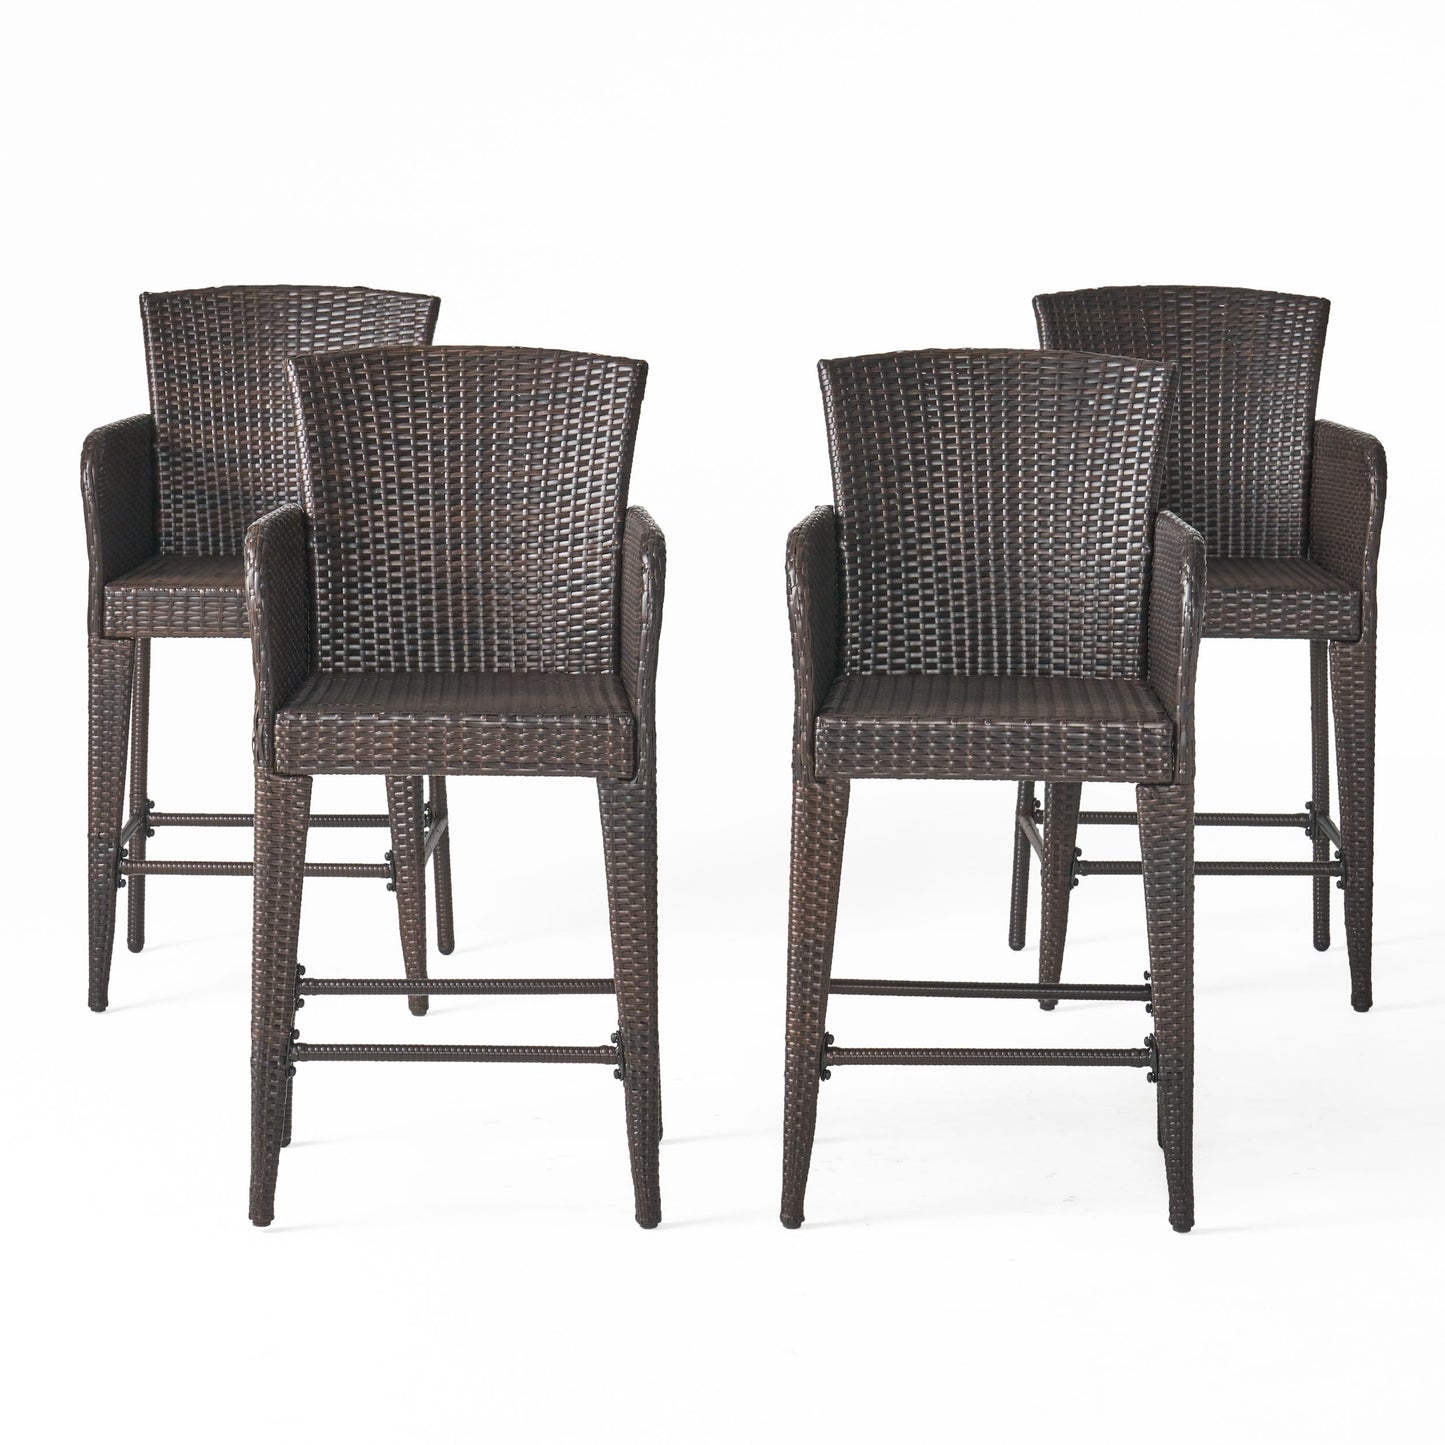 Bheleso 28-Inch Contemporary Outdoor Multibrown Wicker Barstool (Set of 4)